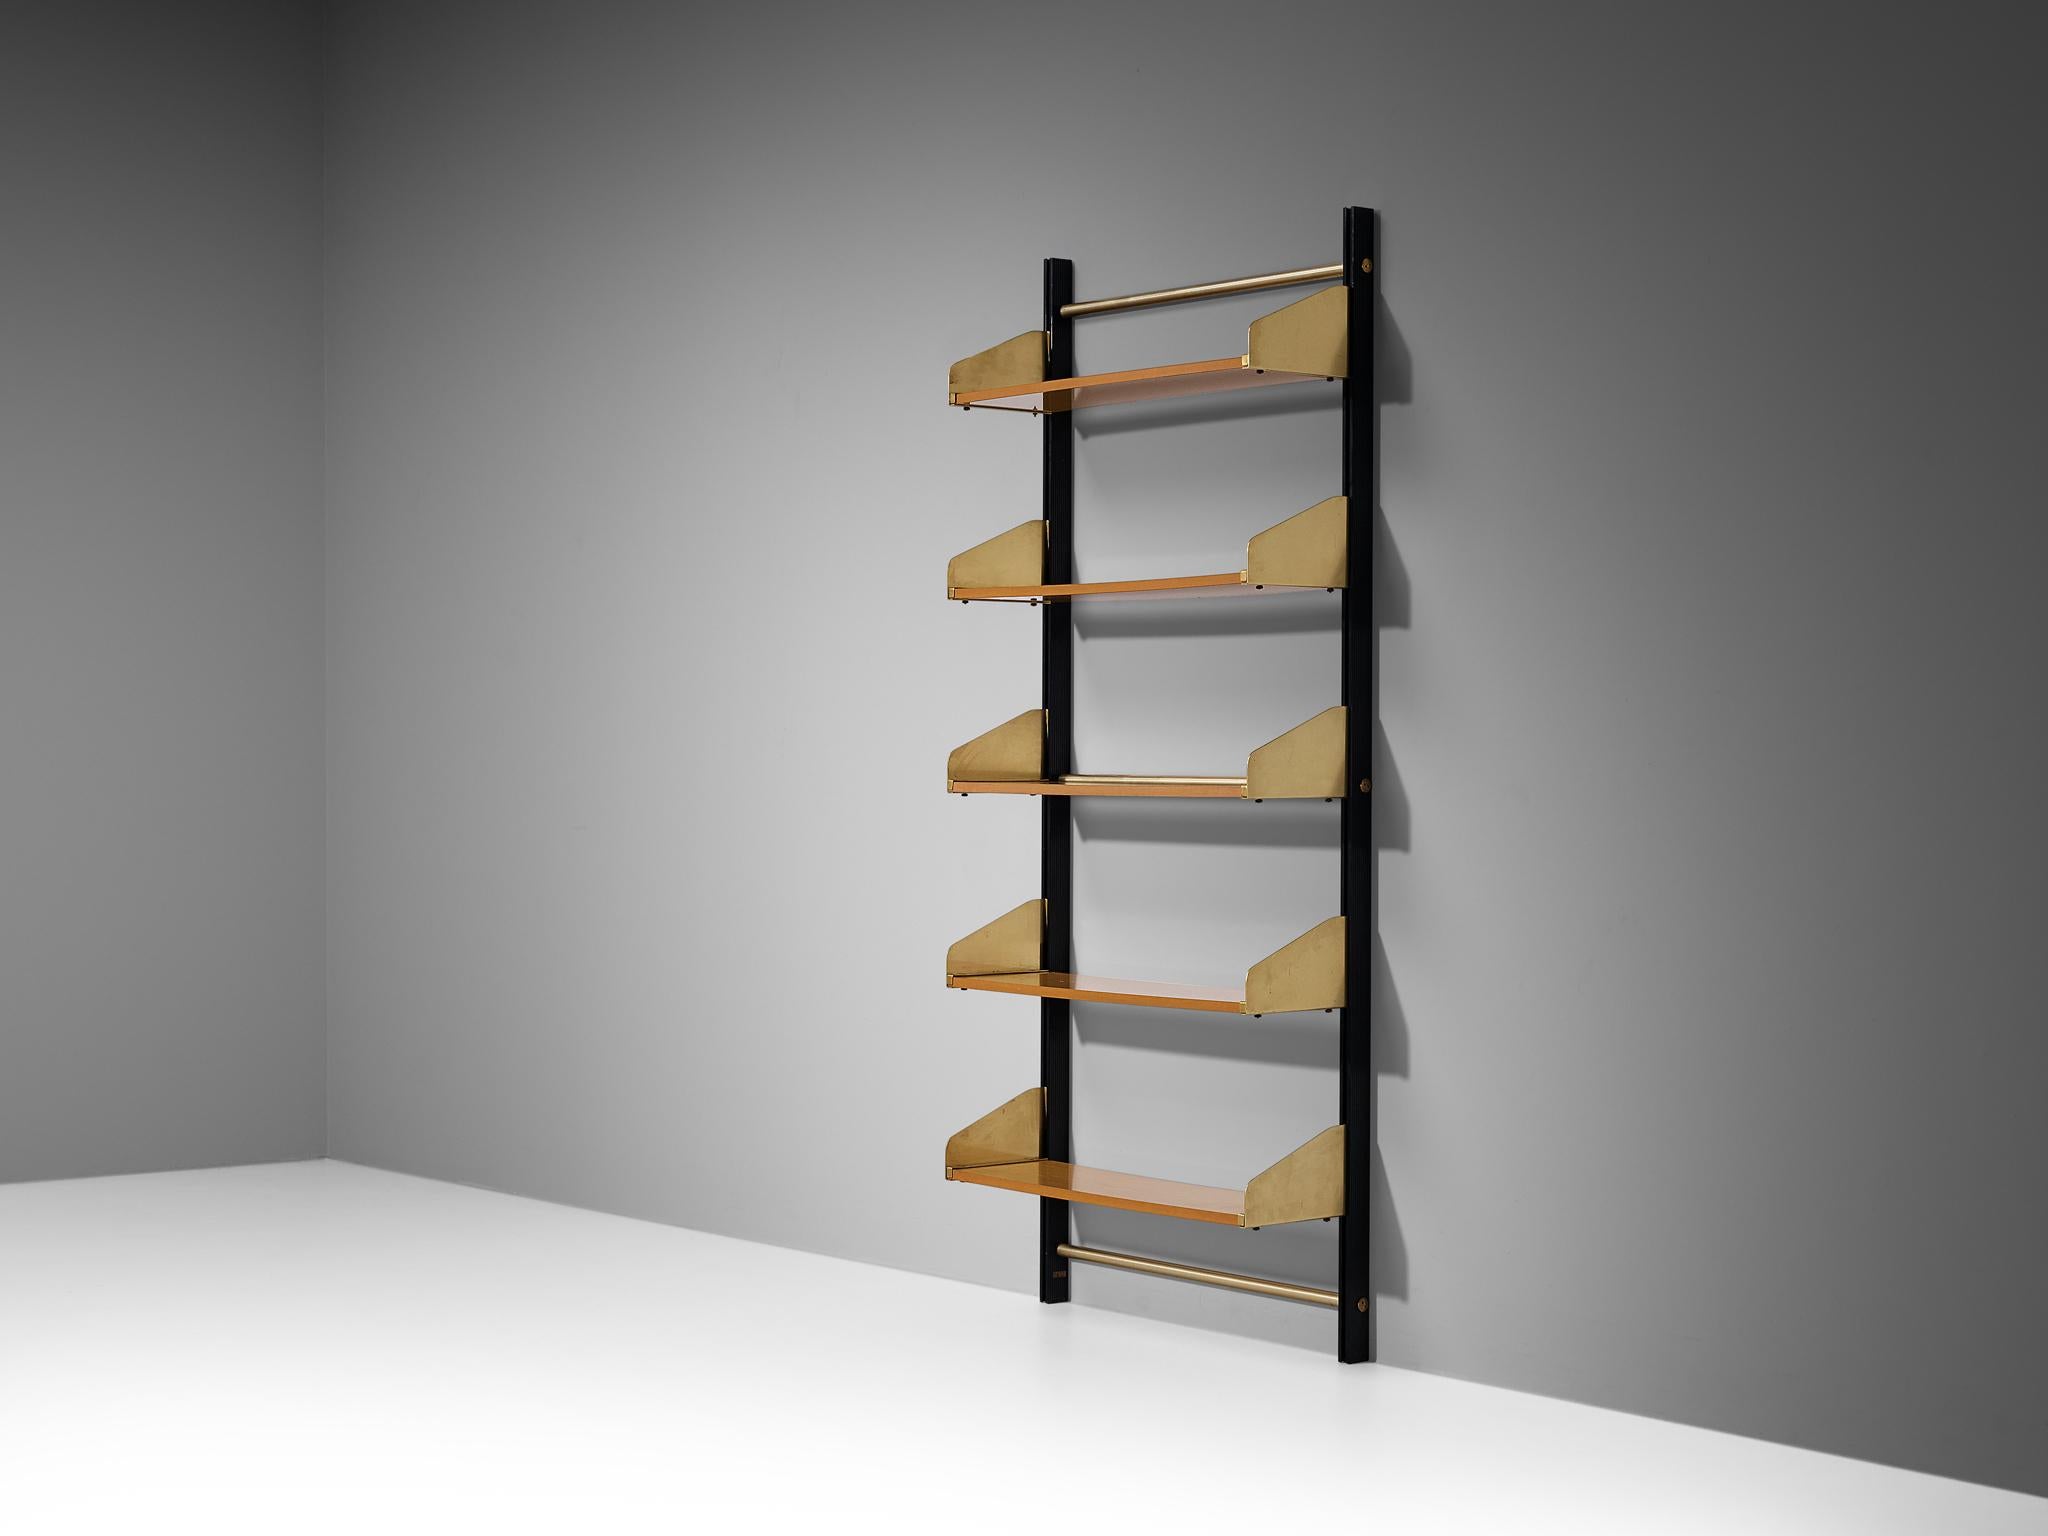 Feal (Fonderie Elettriche Alluminio e Lega), model ‘S2’ wall unit, oak veneer, anodized aluminum, brass-plated aluminum, Italy, 1950s 

Both aesthetics and functionality comes into play in this streamlined bookcase shelf; elegant in line and